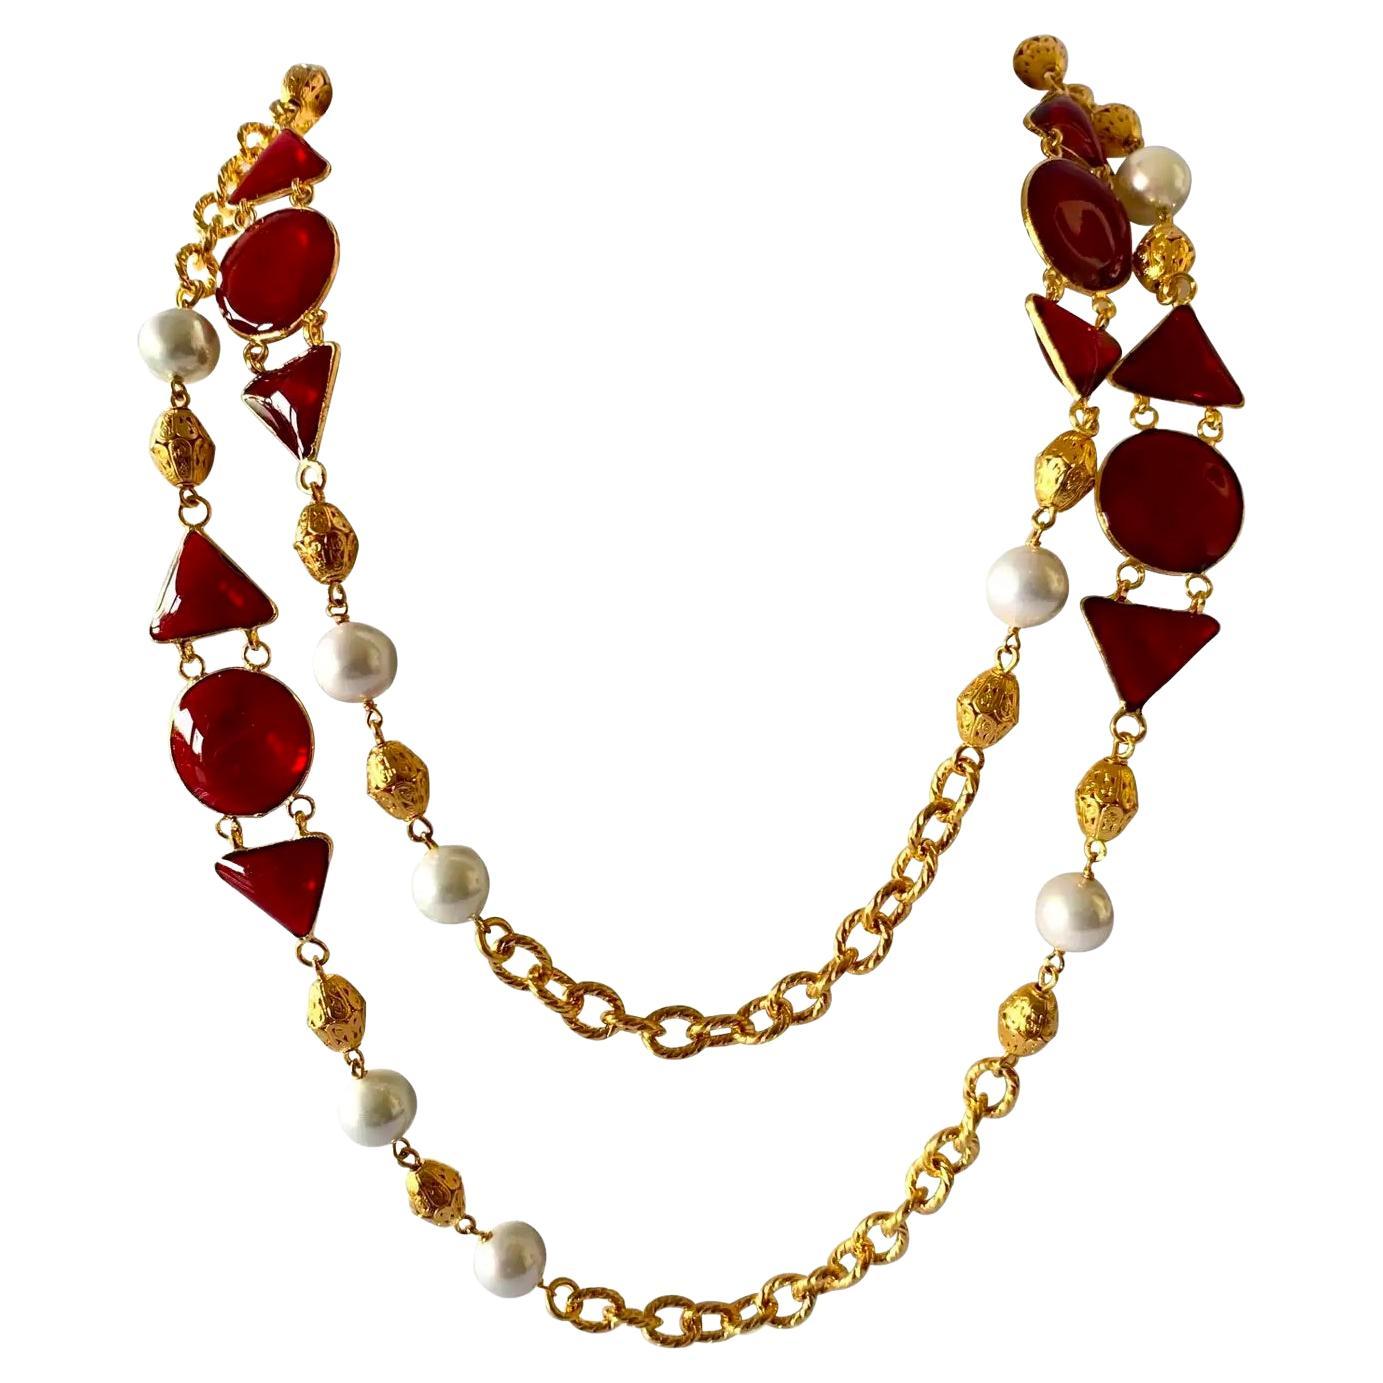 1980s French Red Gripoix Pearl Sautoir Necklace Pate de Verre Costume Jewelry